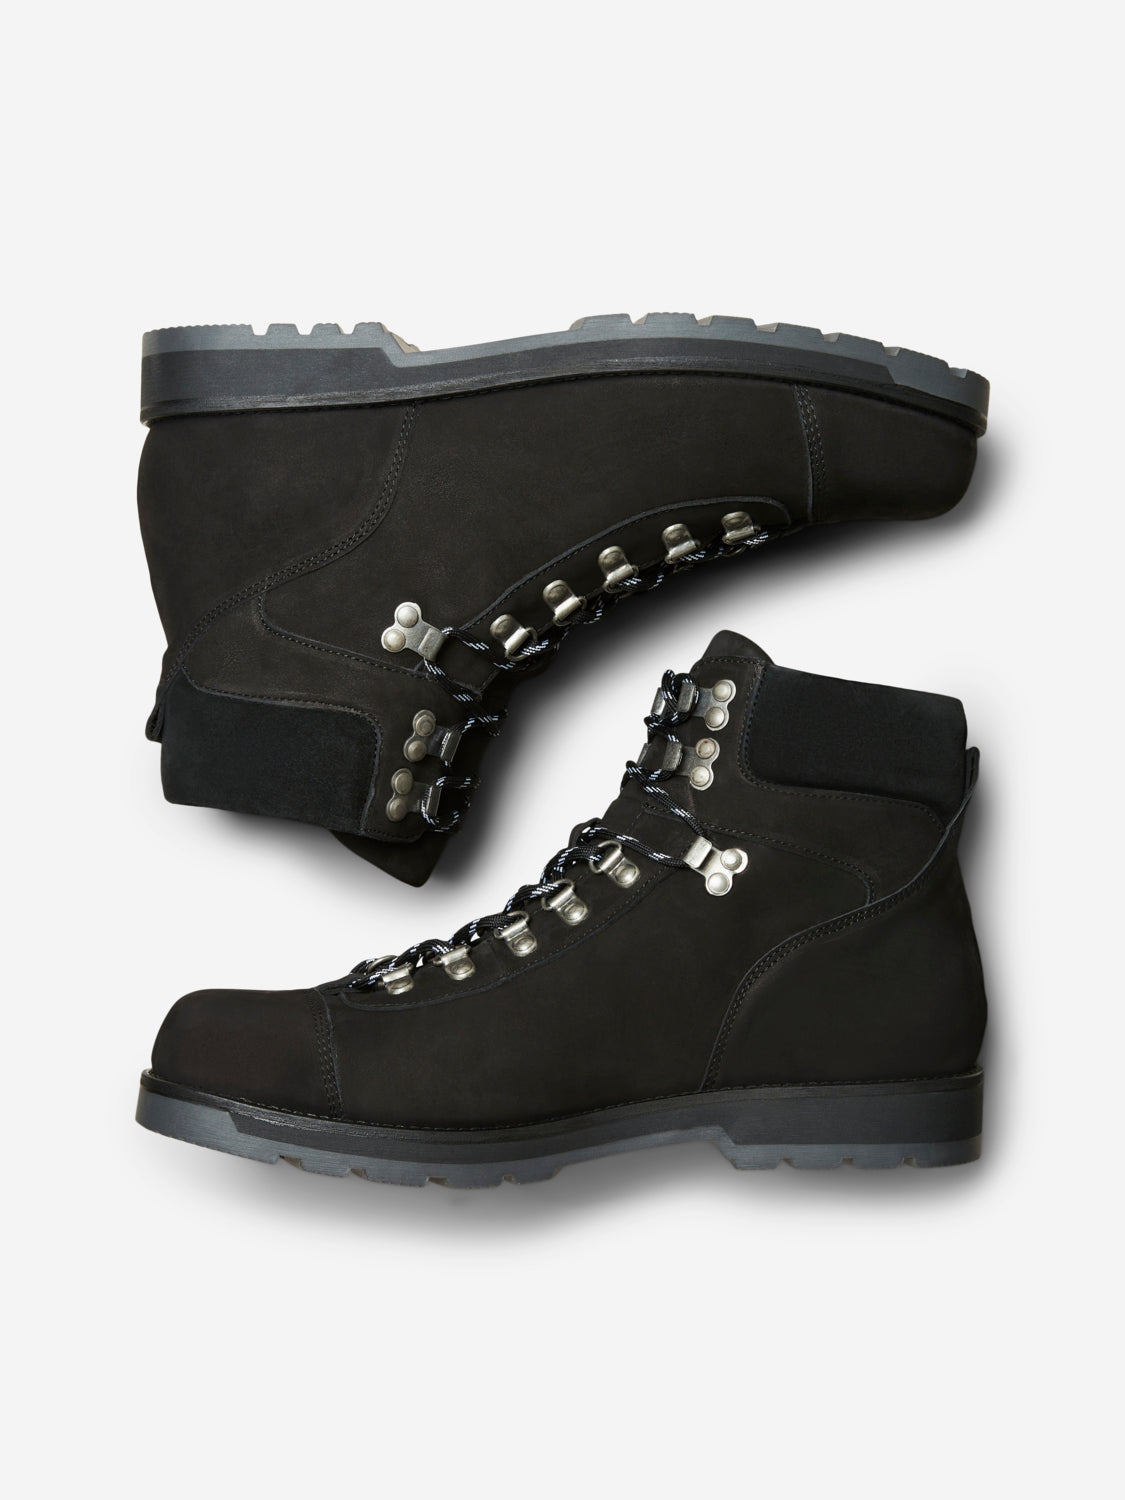 SLHAUGUST Boots - Black